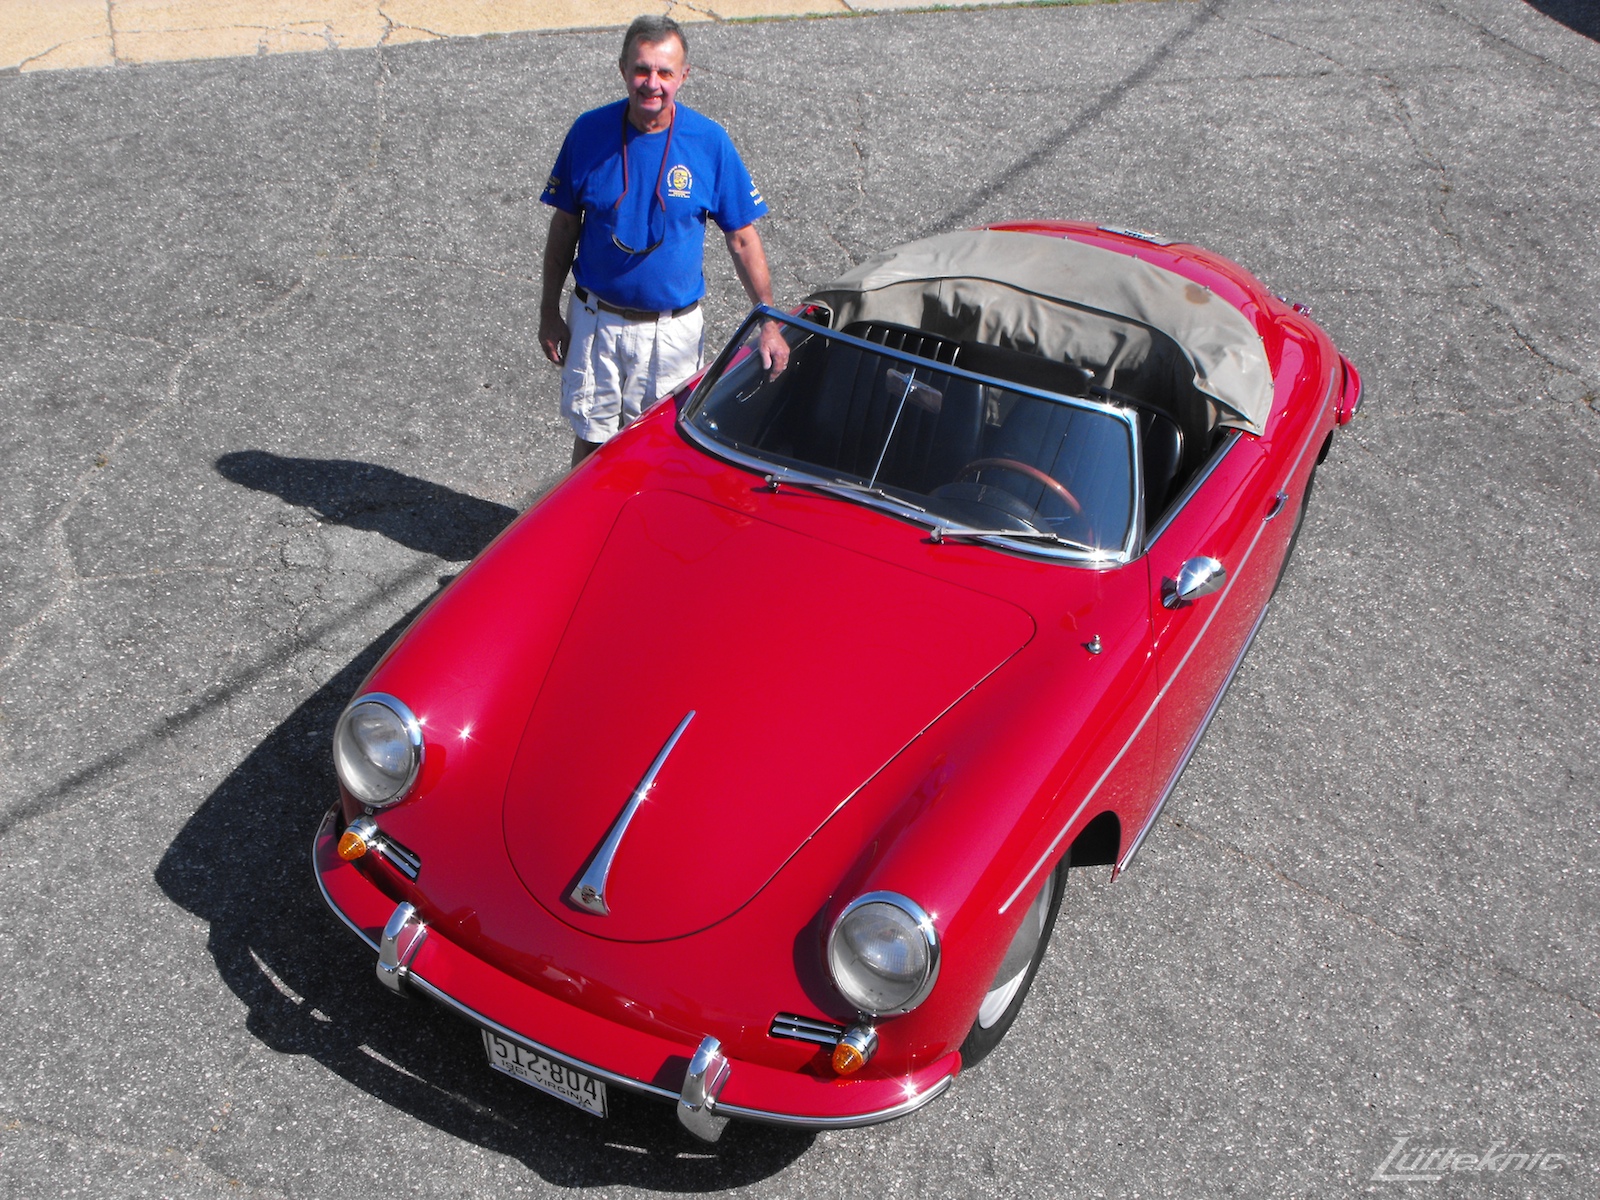 Proud owner and newly restored 1961 Porsche 356B Roadster.